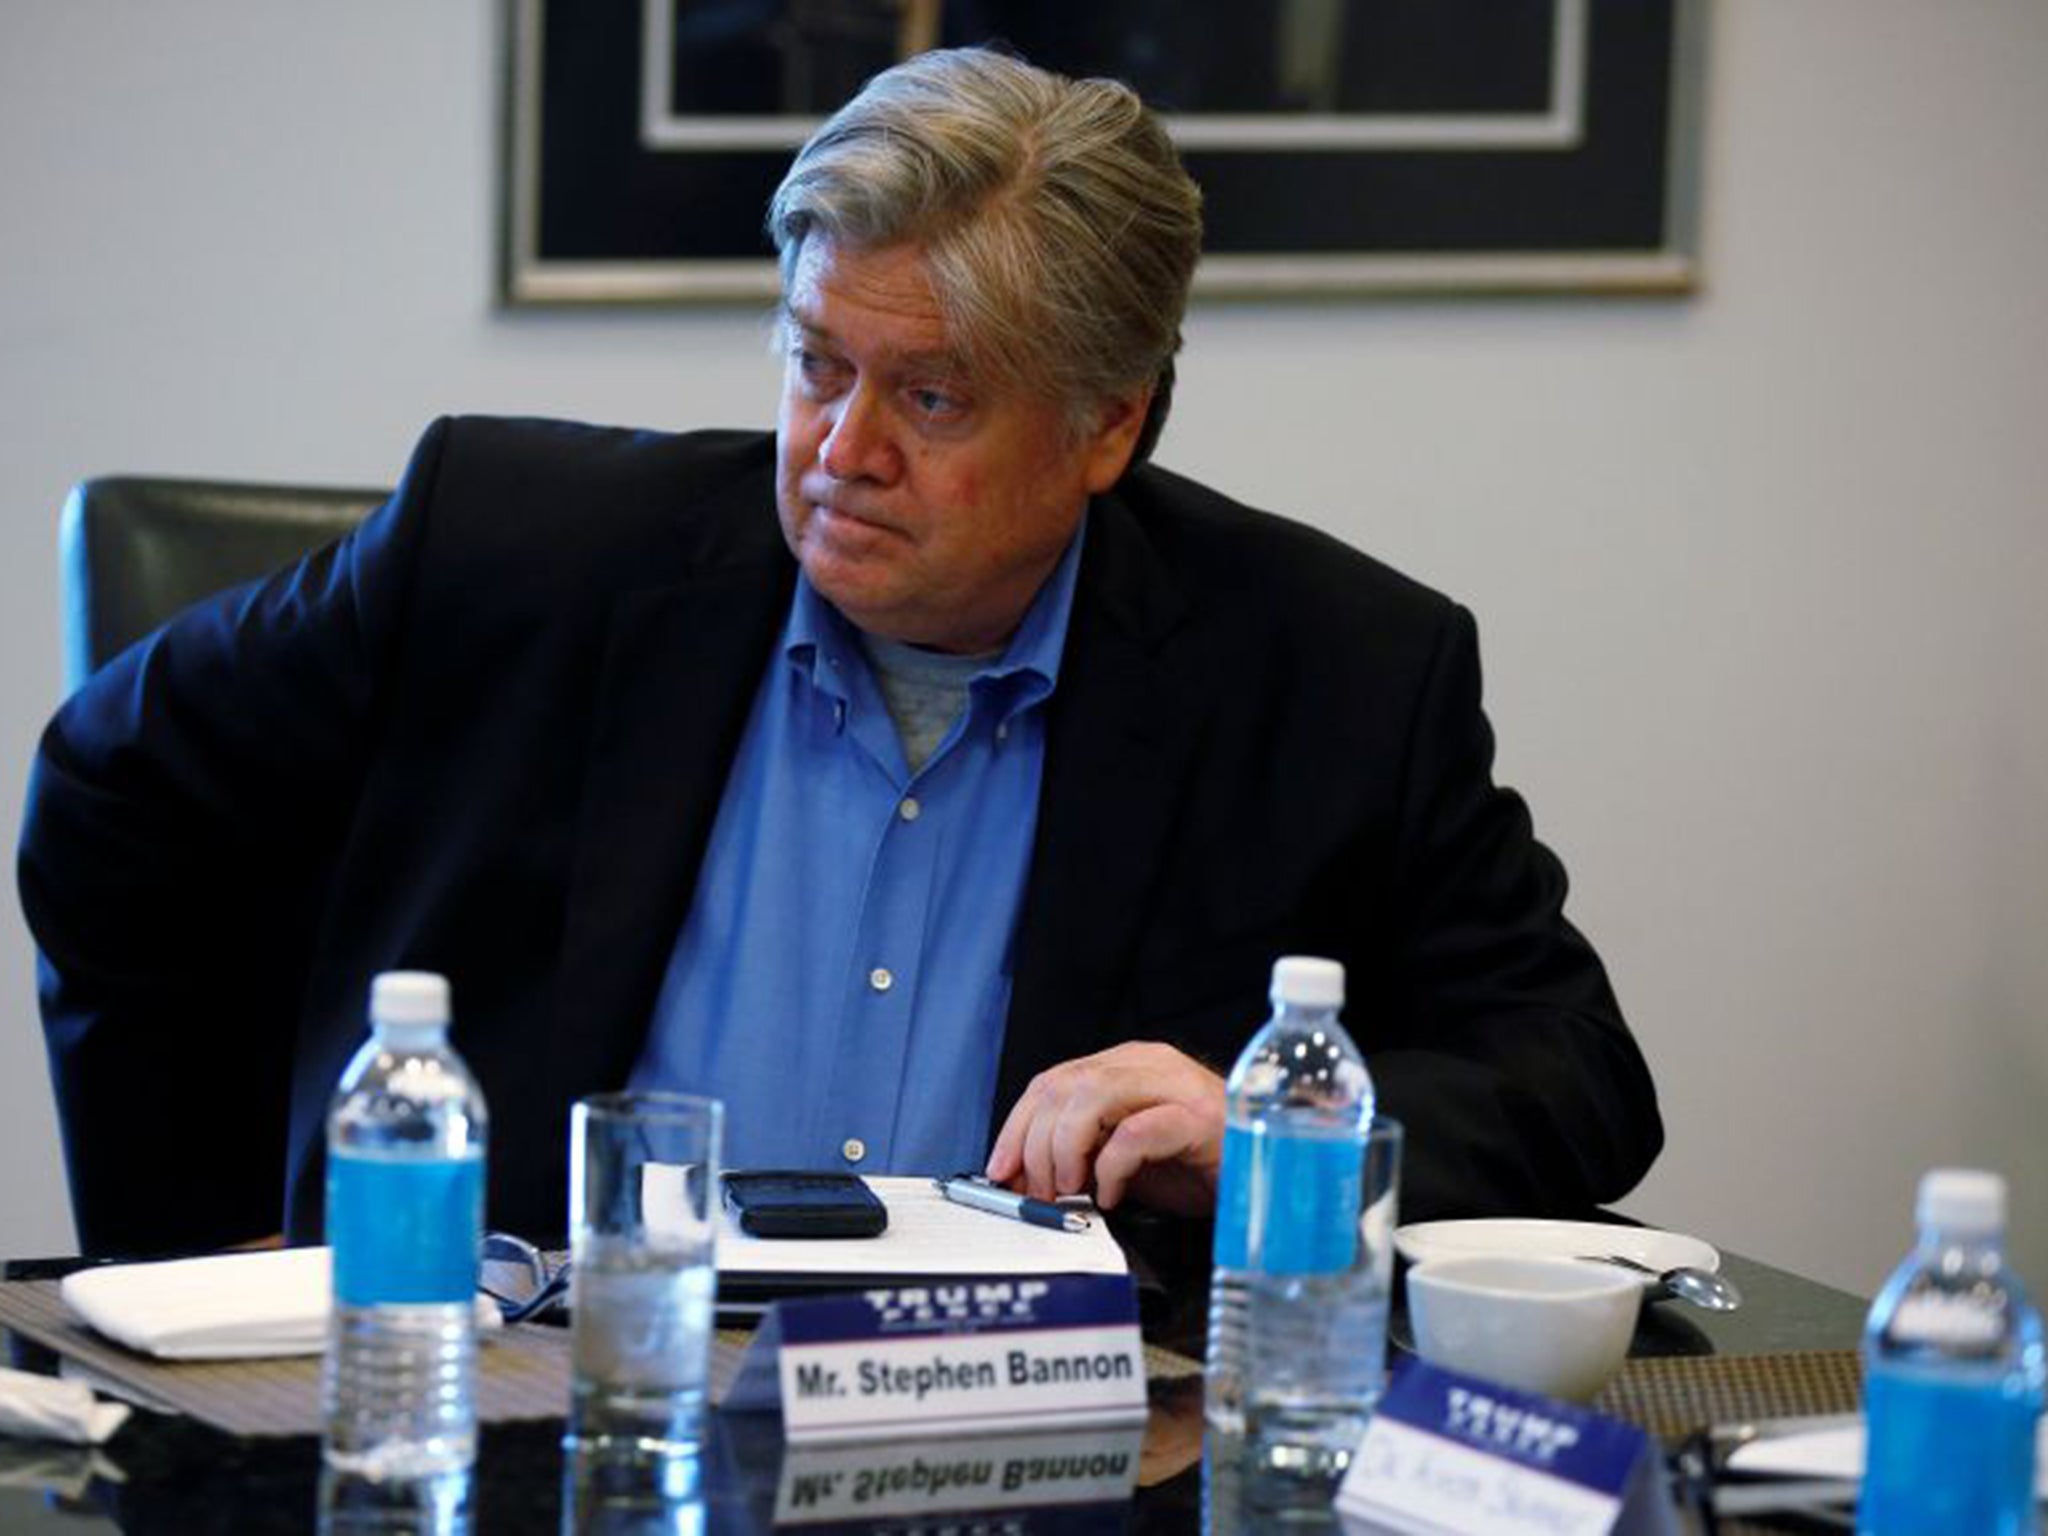 Stephen Bannon listens during Donald Trump's round table discussion yesterday on security at Trump Tower in Manhattan